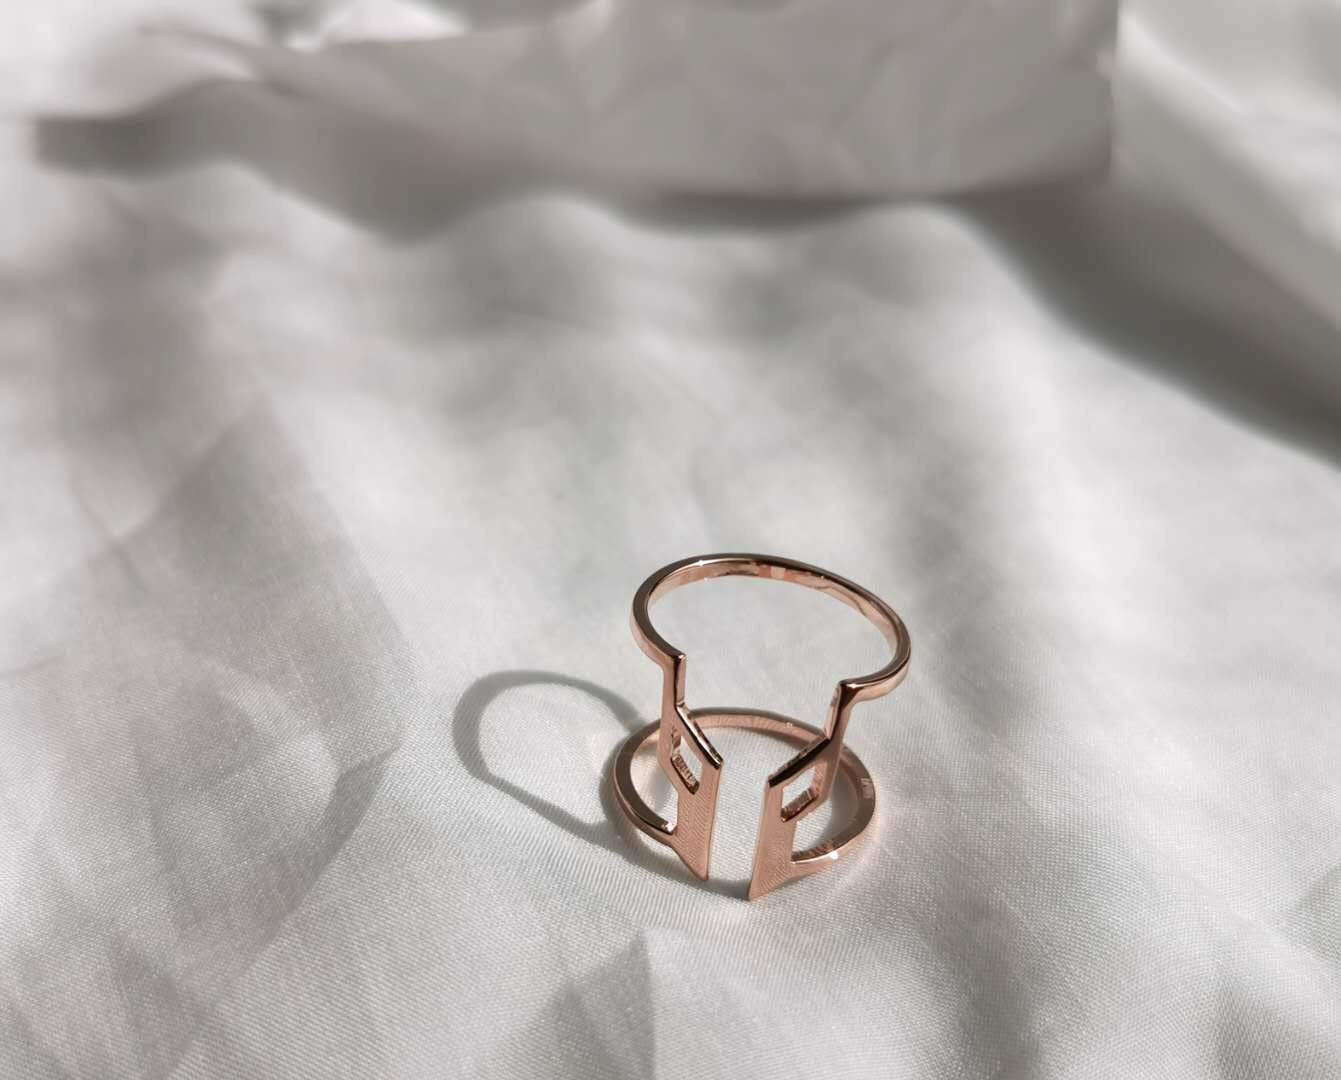 rosegold sustainable jewellery recycled rings cuffs bracelets ethical accessories women